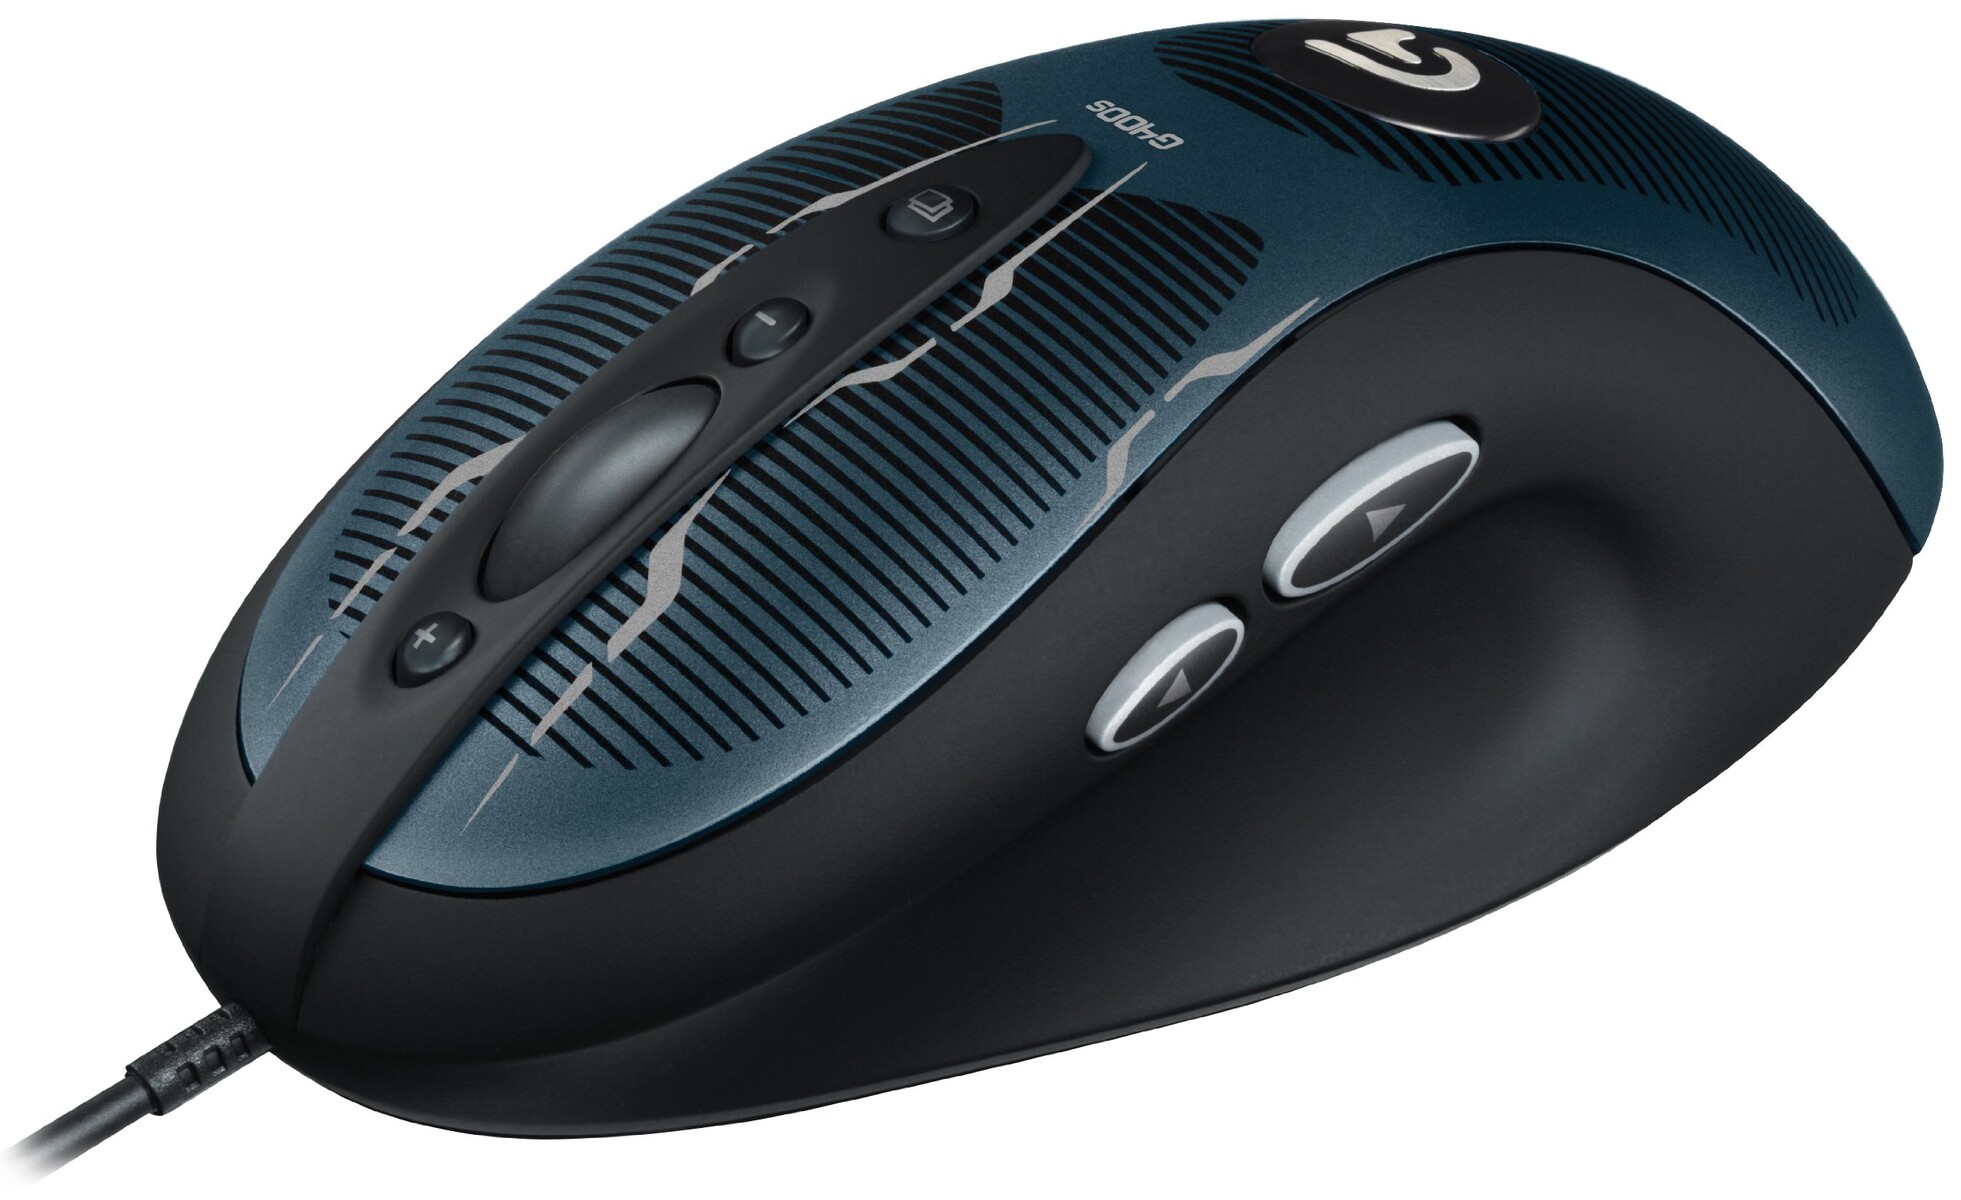 how-to-fix-a-logitech-g400-black-8-buttons-1-x-wheel-usb-wired-optical-3600-dpi-gaming-mouse